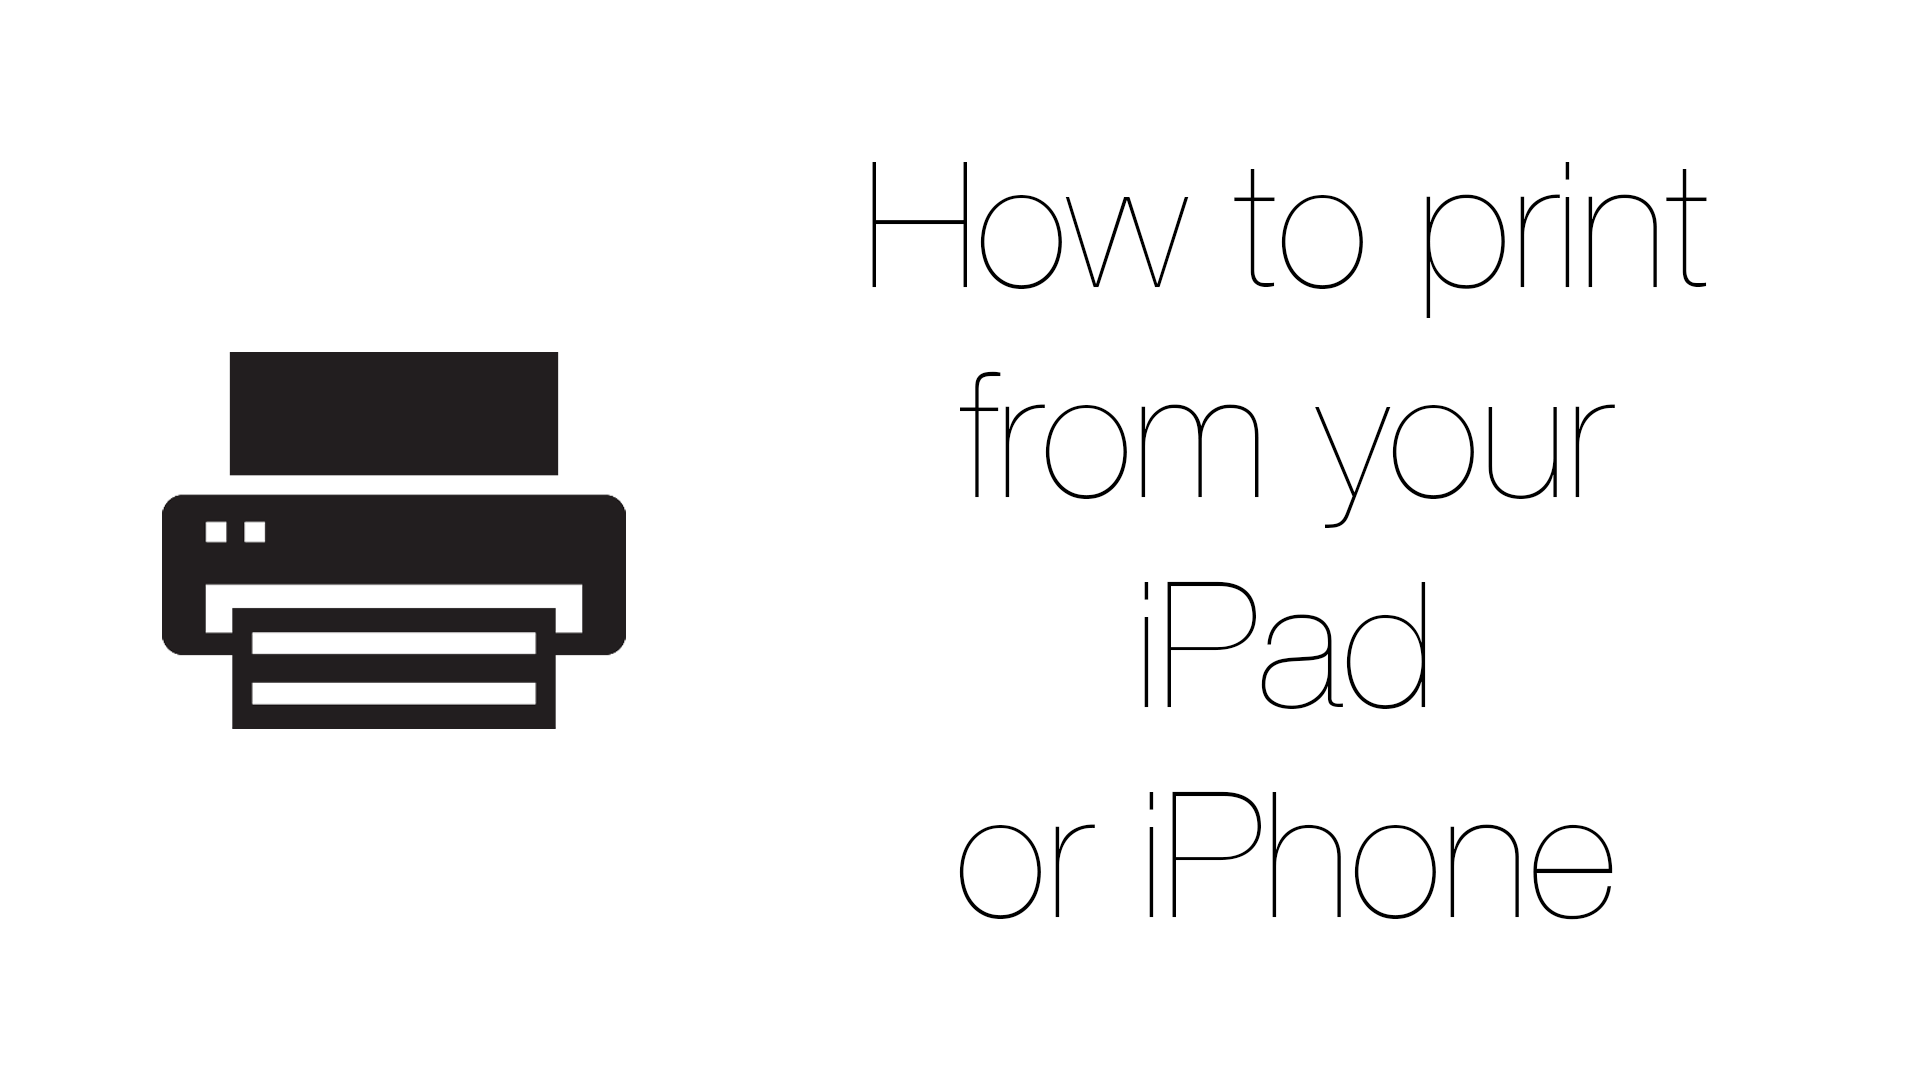 How to print from your iPad or iPhone.